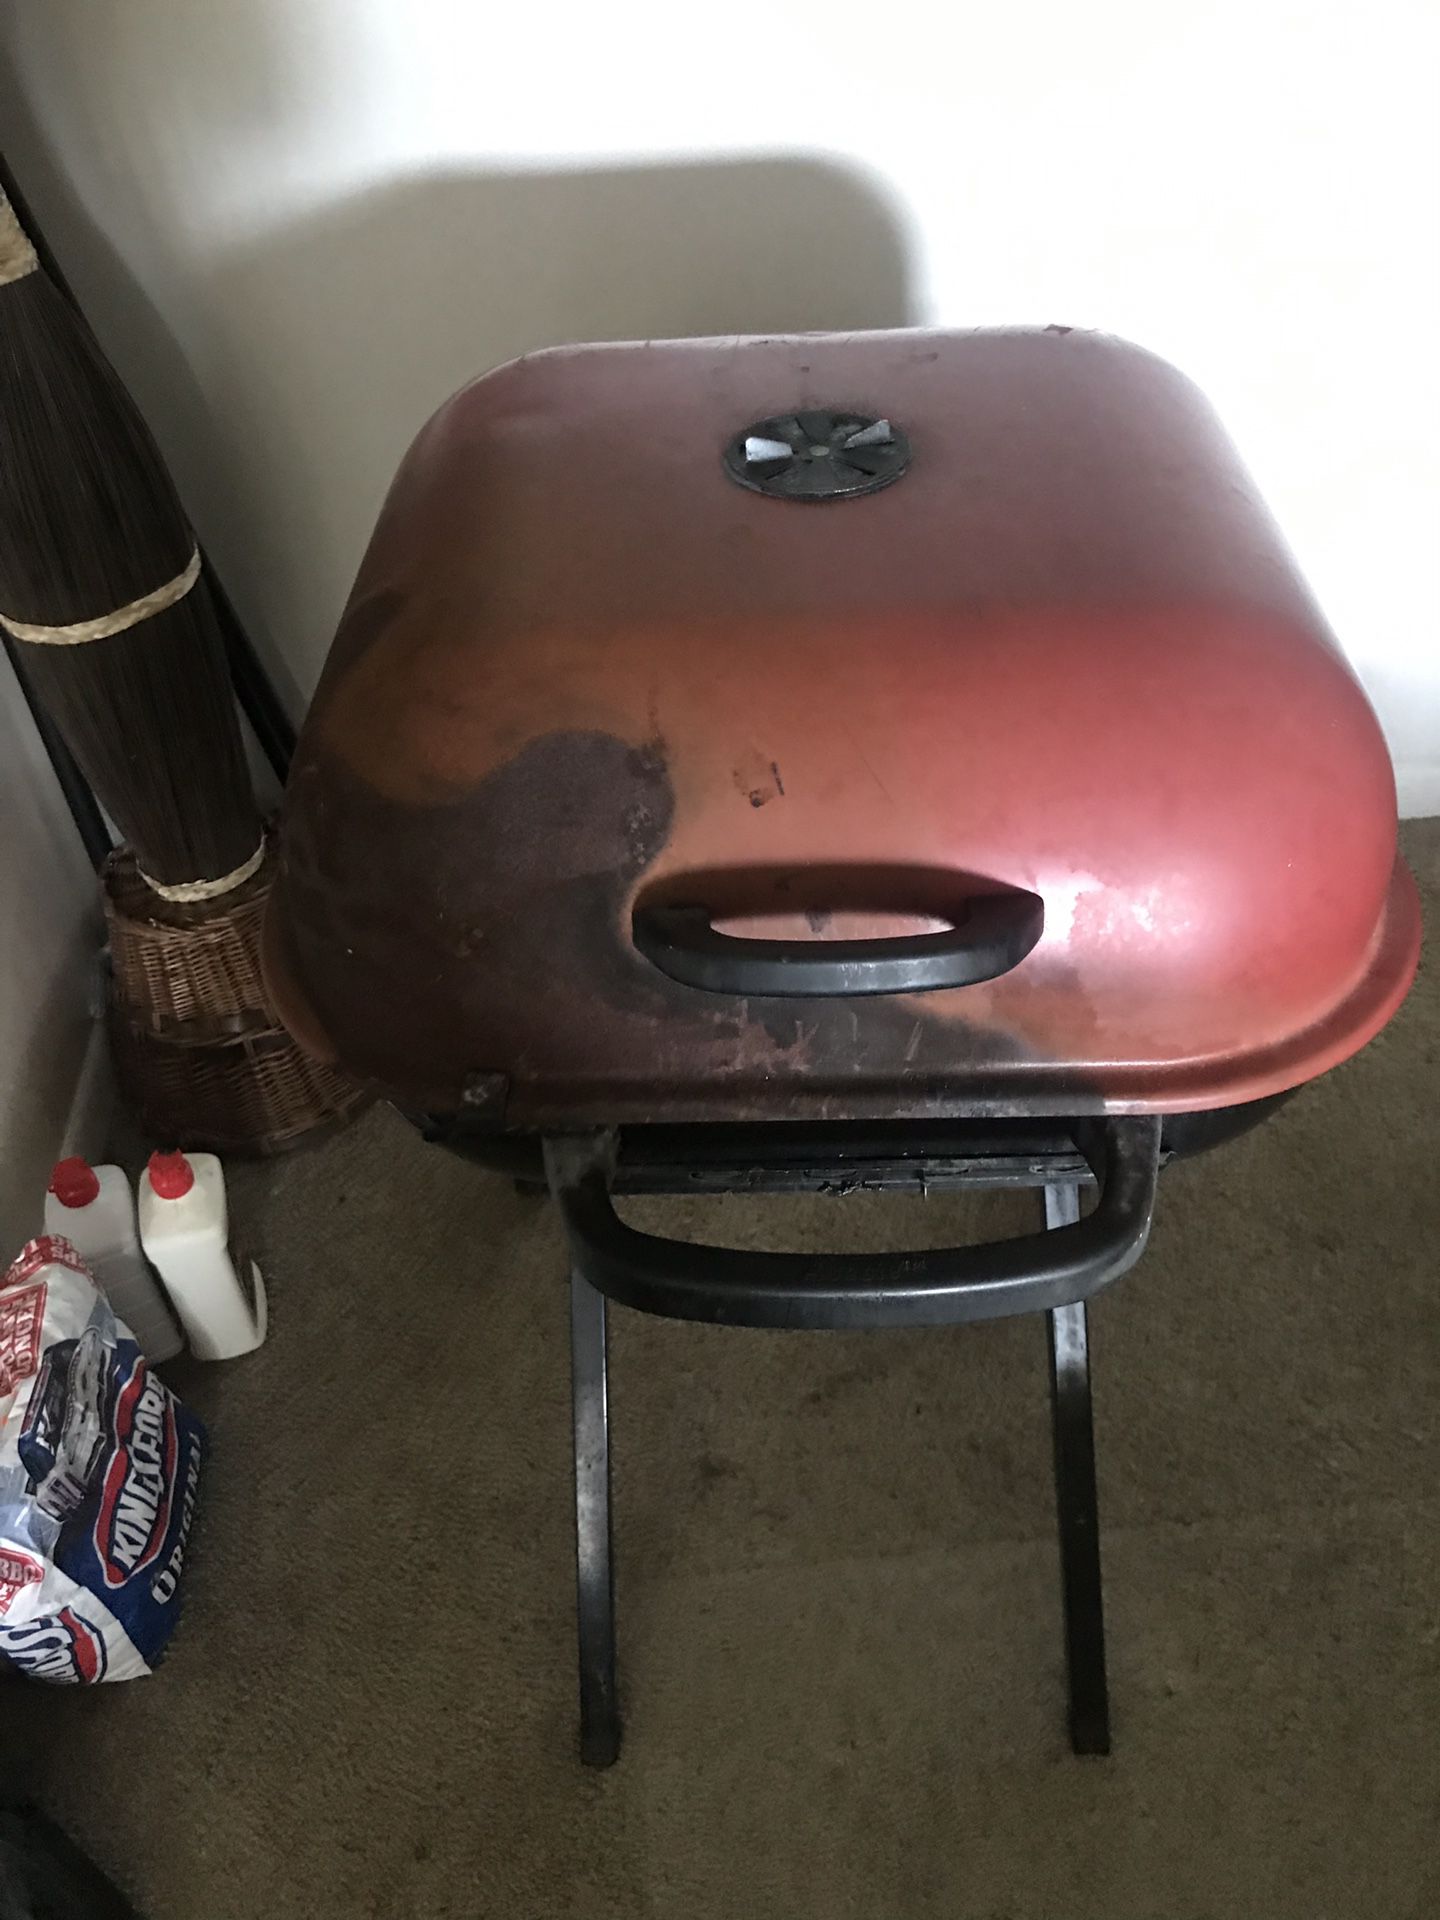 BBQ grill. Noting wrong with it. Just need cleaning or raking out. Need gone by Fri 4/23